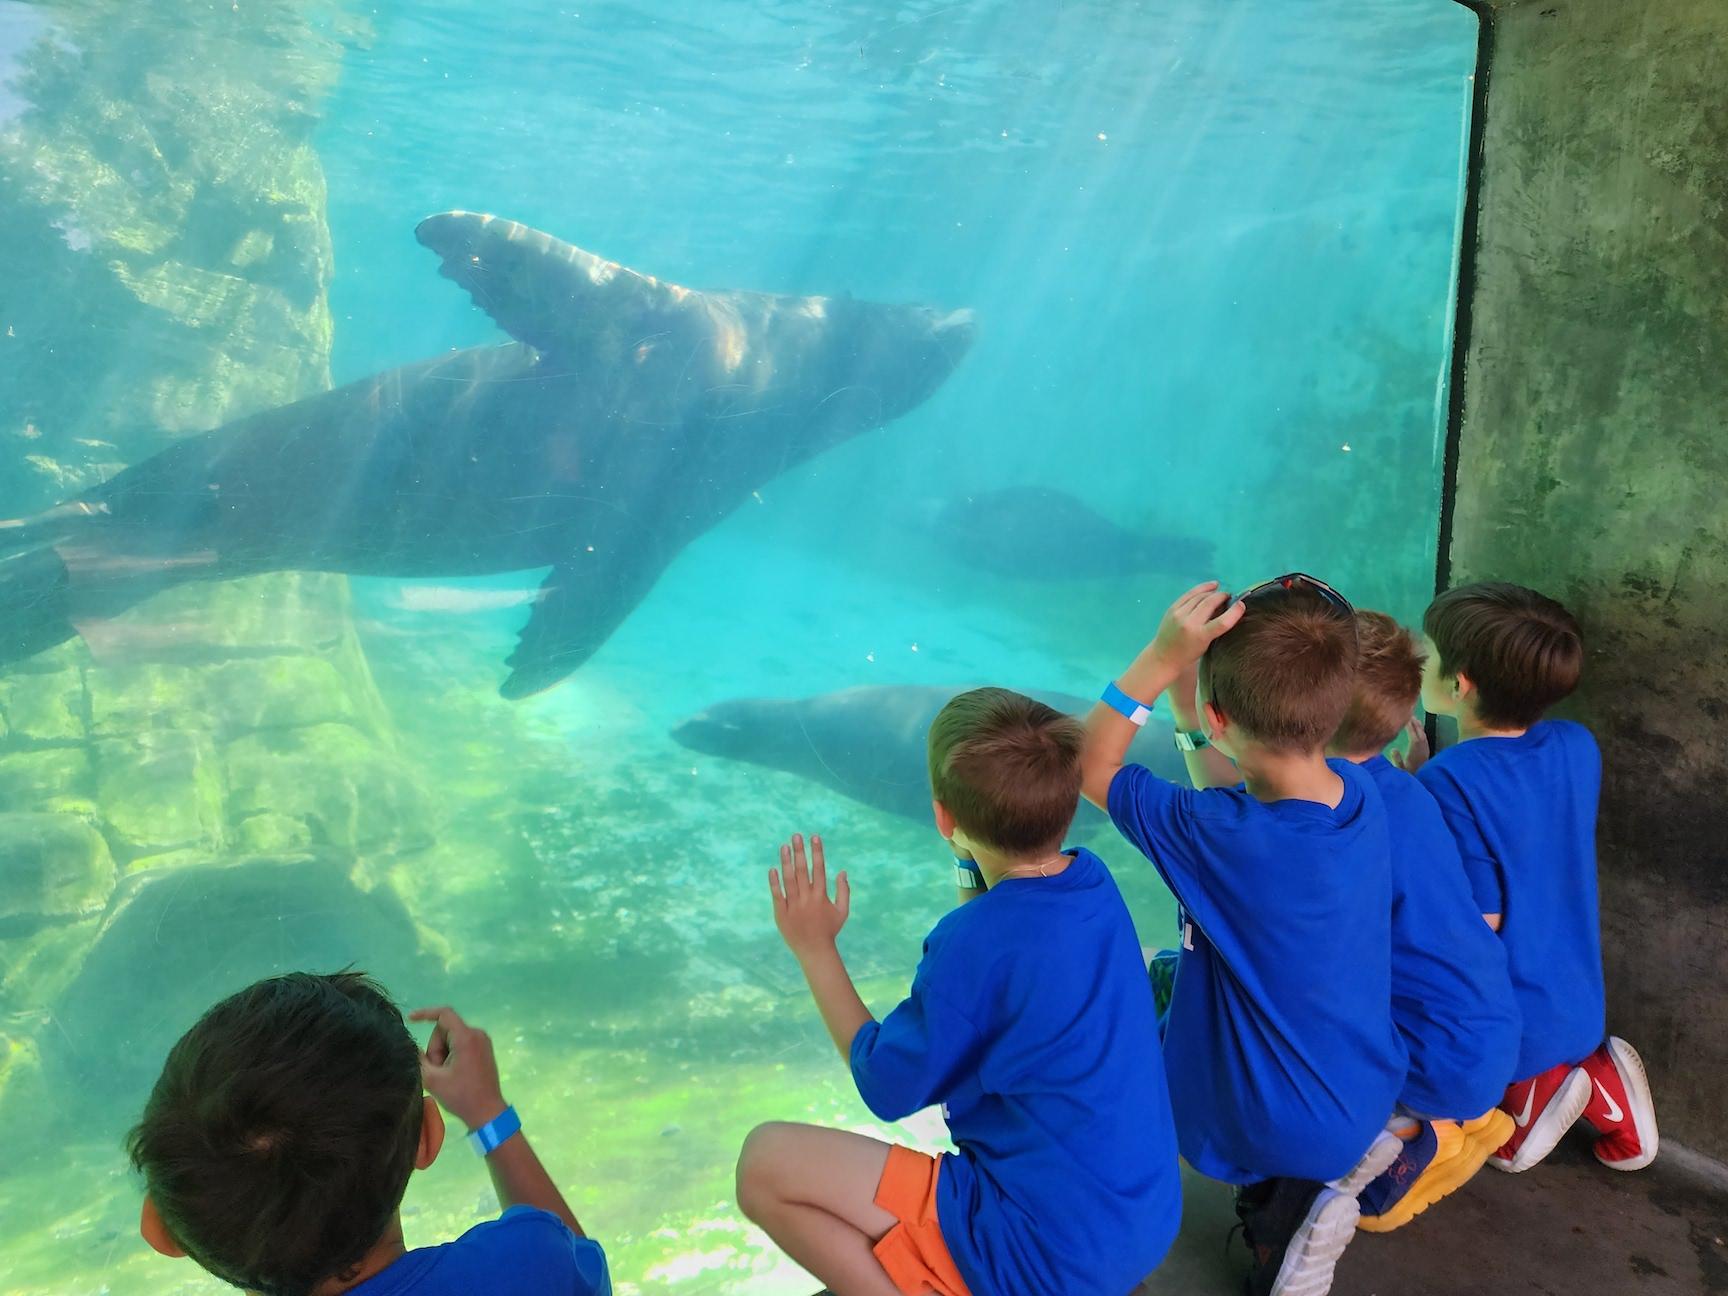 The aquarium was a big hit for these students